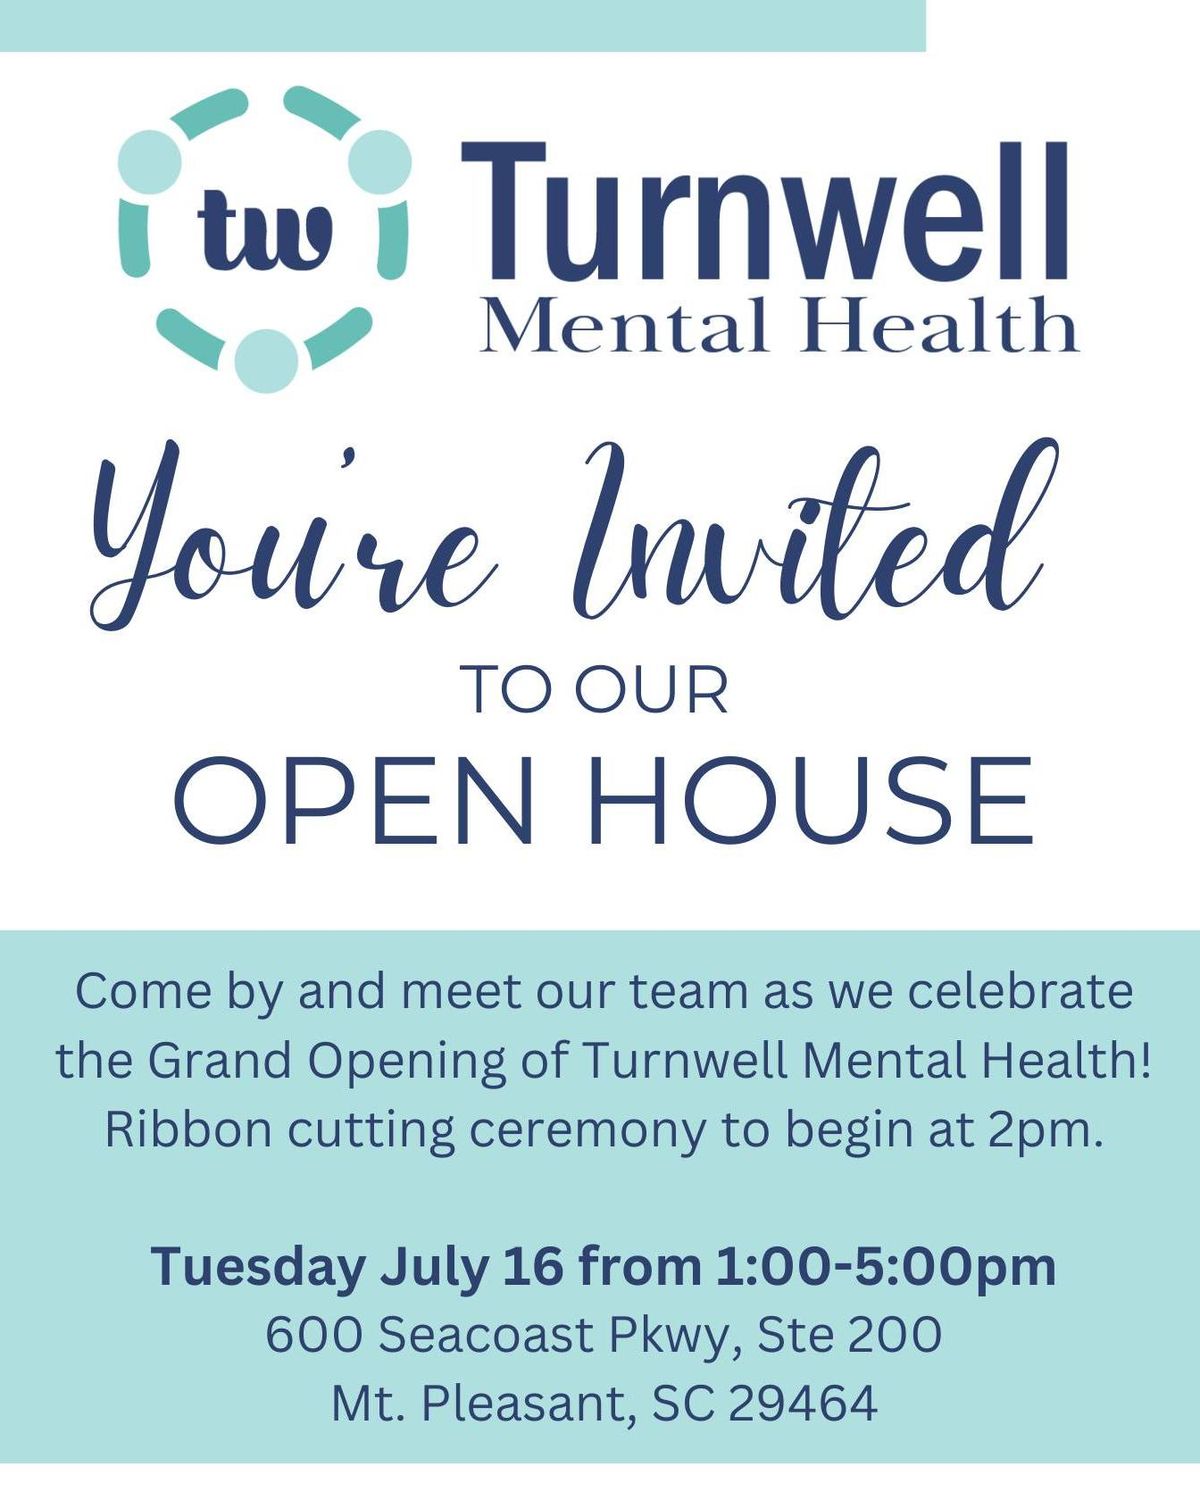 Grand Opening celebration of Turnwell Mental Health